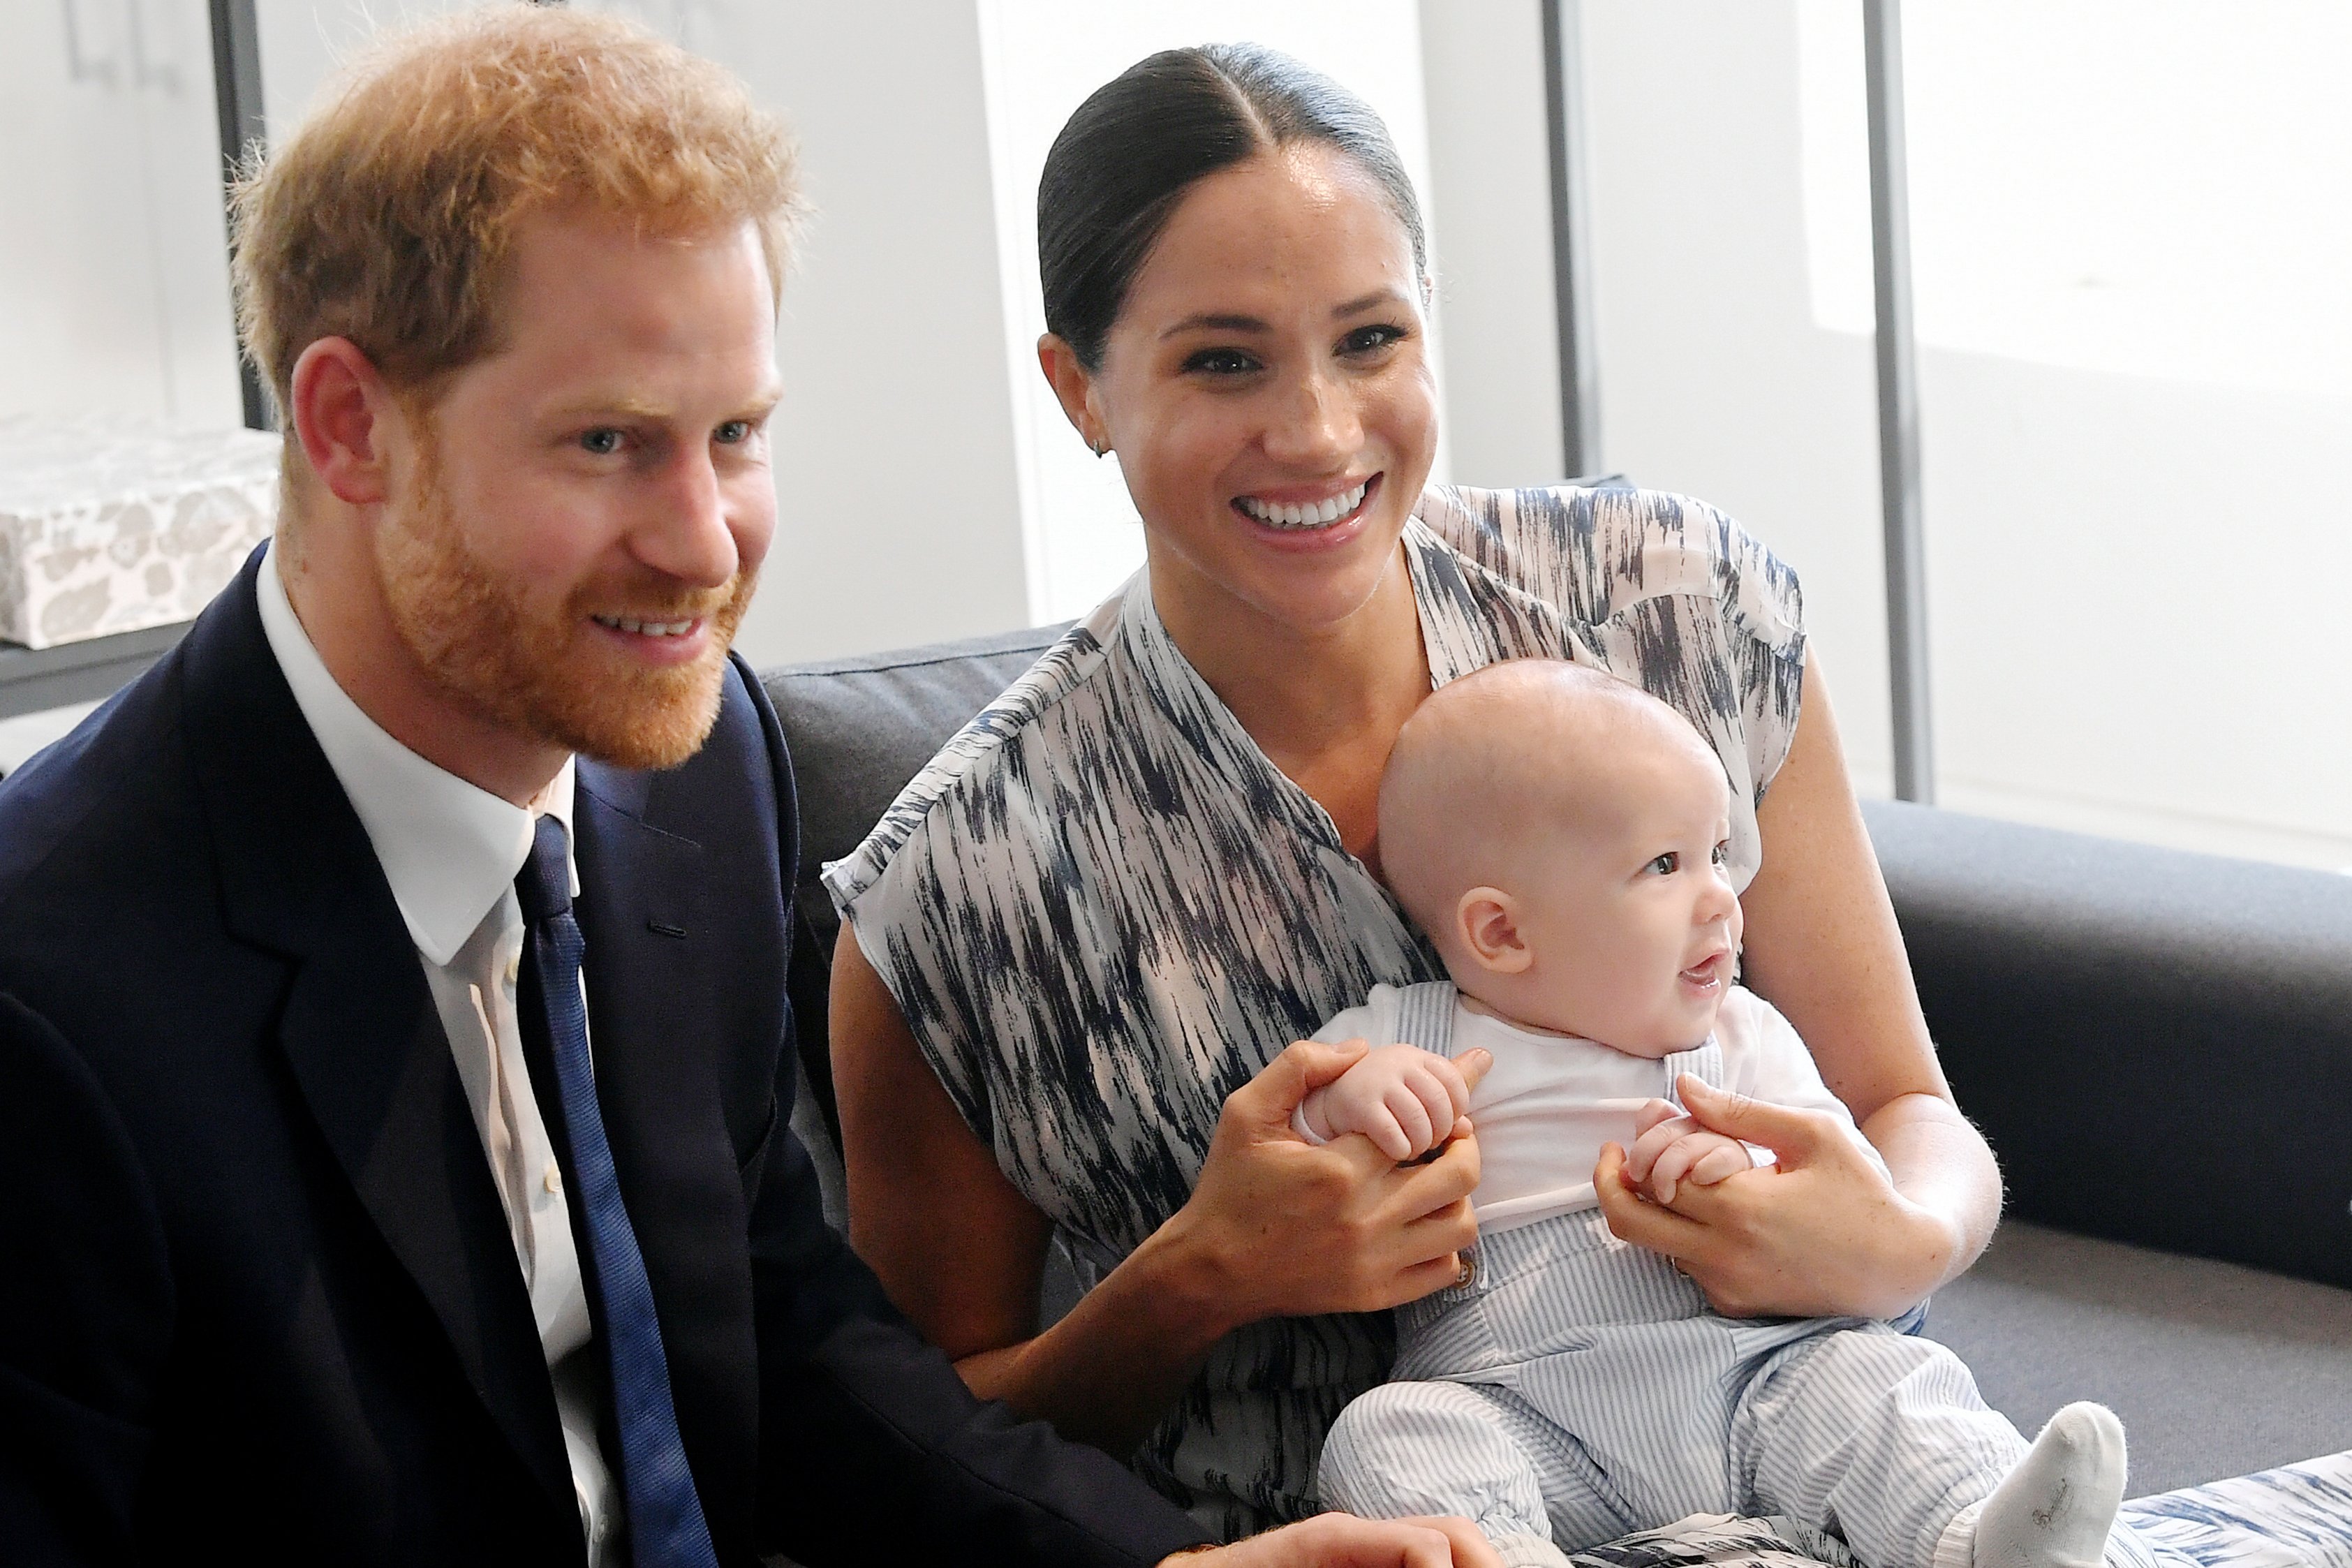 Prince Harry and Meghan Markle with son Archie Mountbatten-Windsor meeting with Archbishop Desmond Tutu in Cape Town, South Africa on September 25, 2019 | Photo: Getty Images